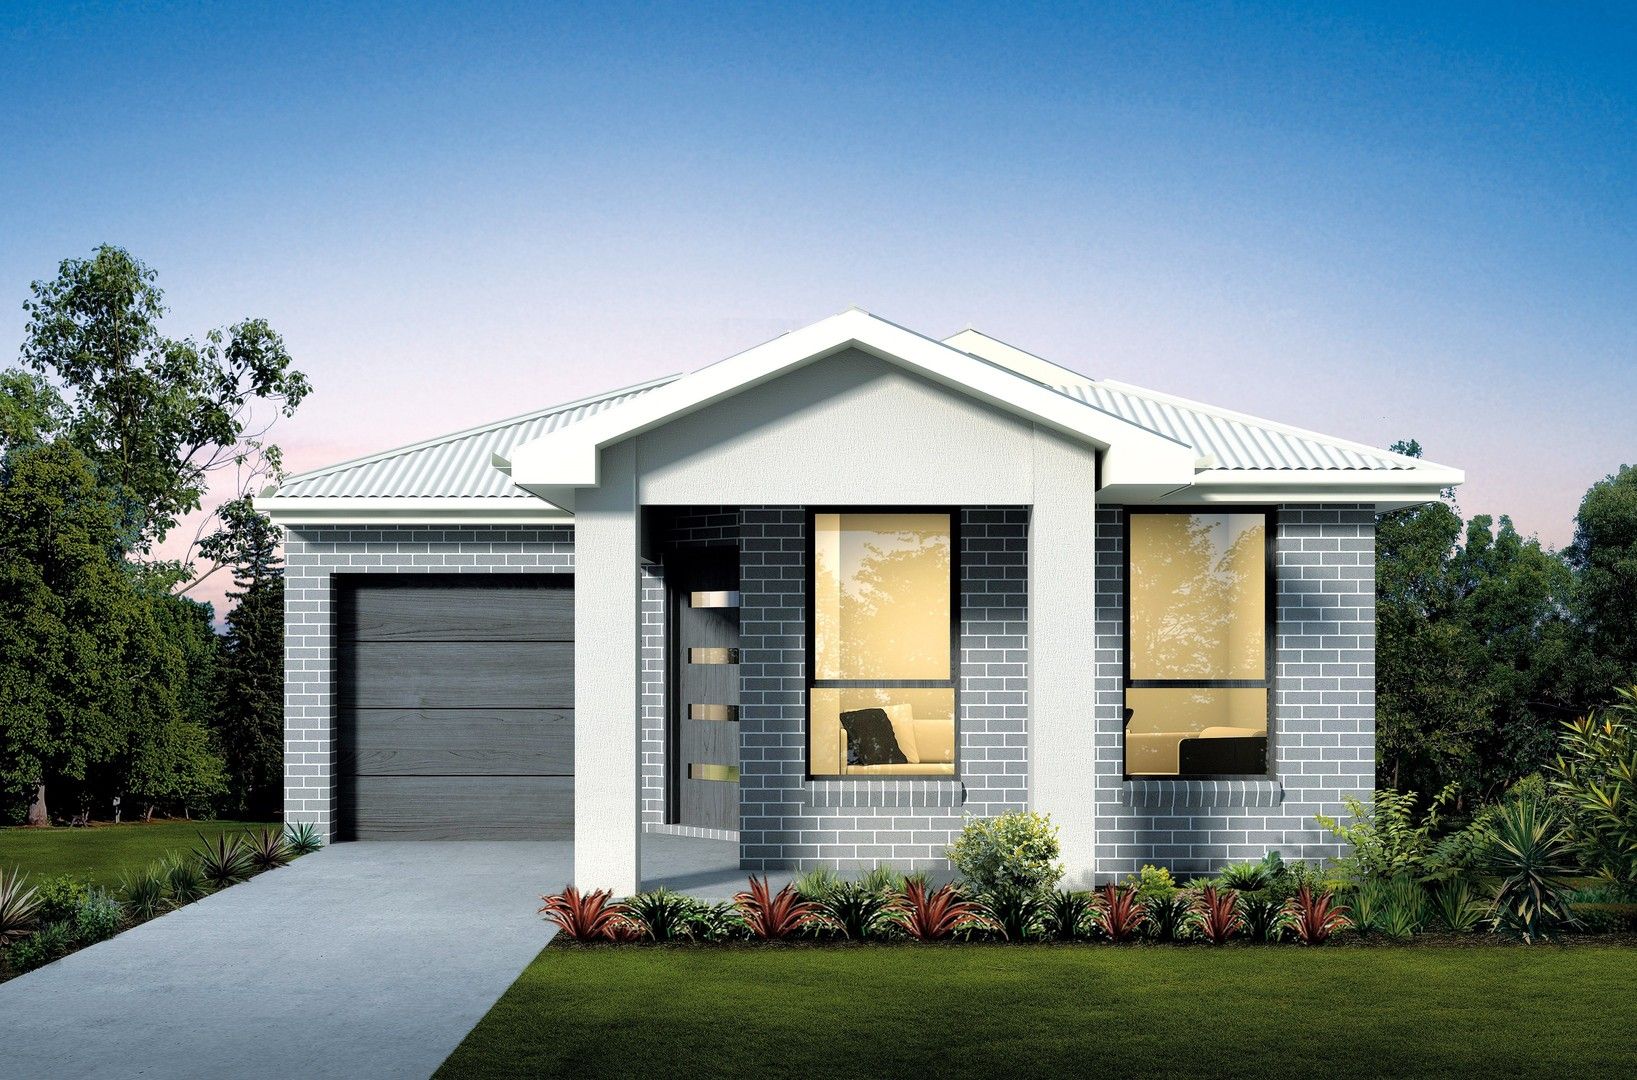 4 bedrooms New House & Land in Lot 302 Dolly Circuit CALDERWOOD NSW, 2527